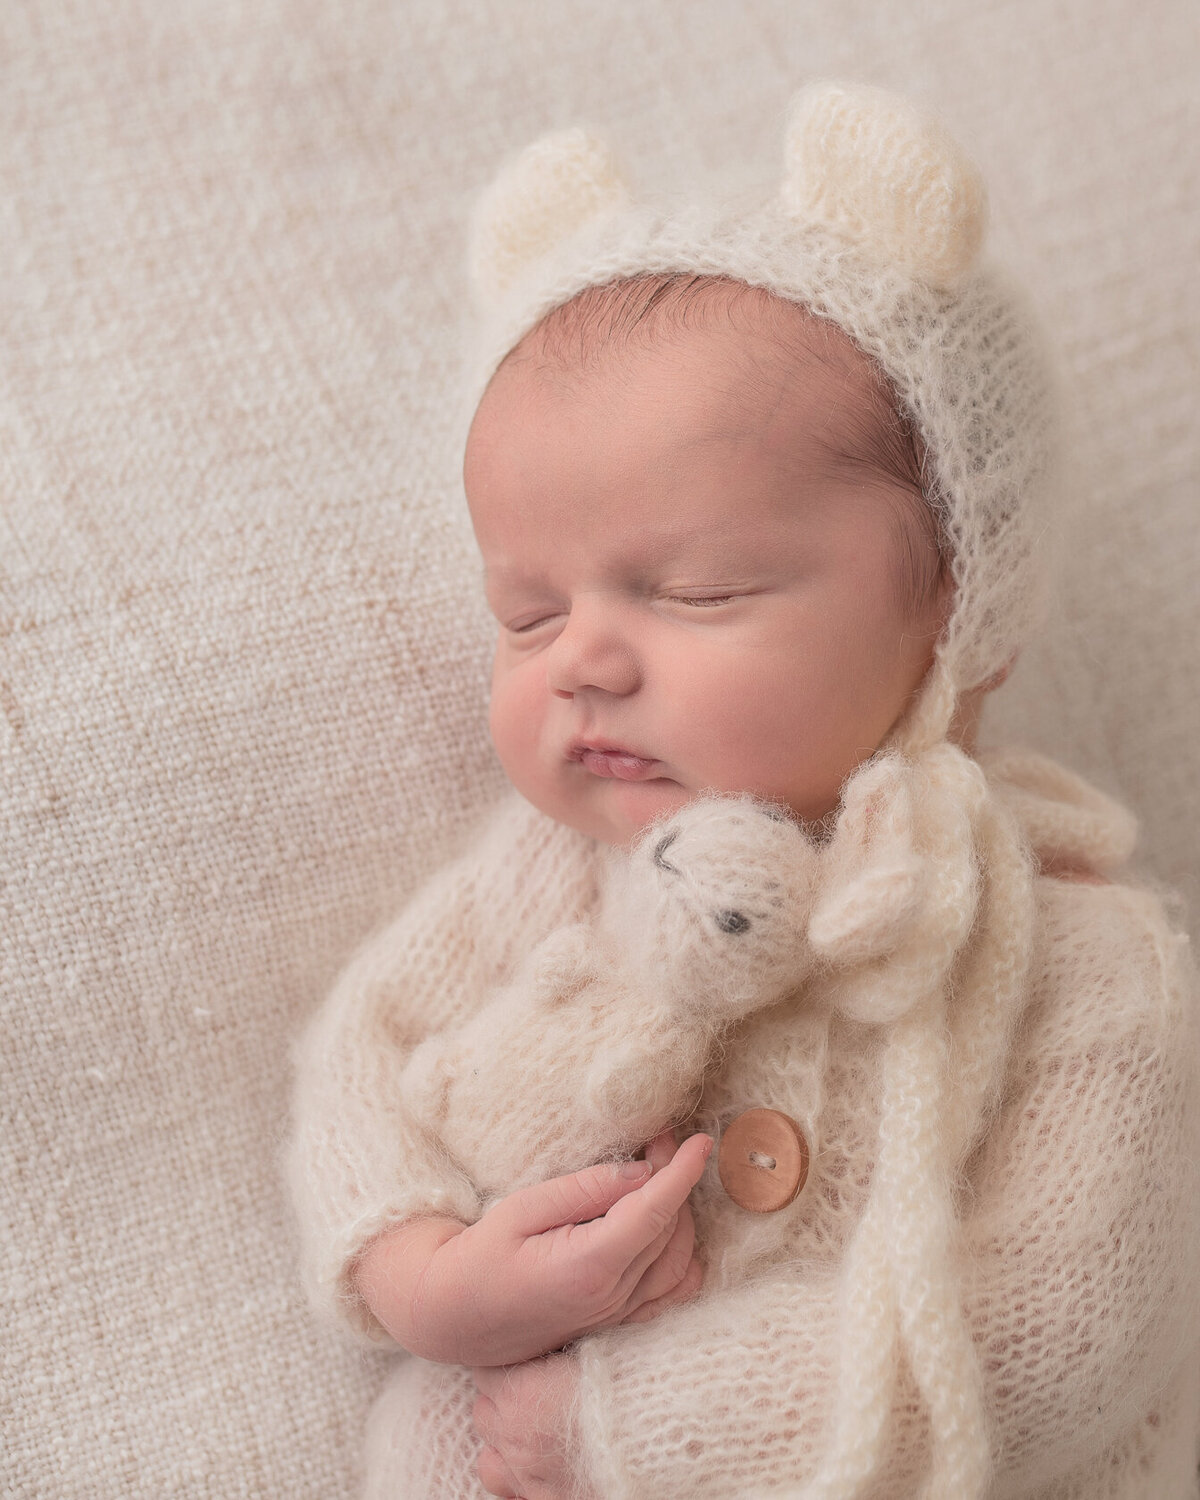 Newborn Photography with a Bunny friend, captured by Laura King Photography